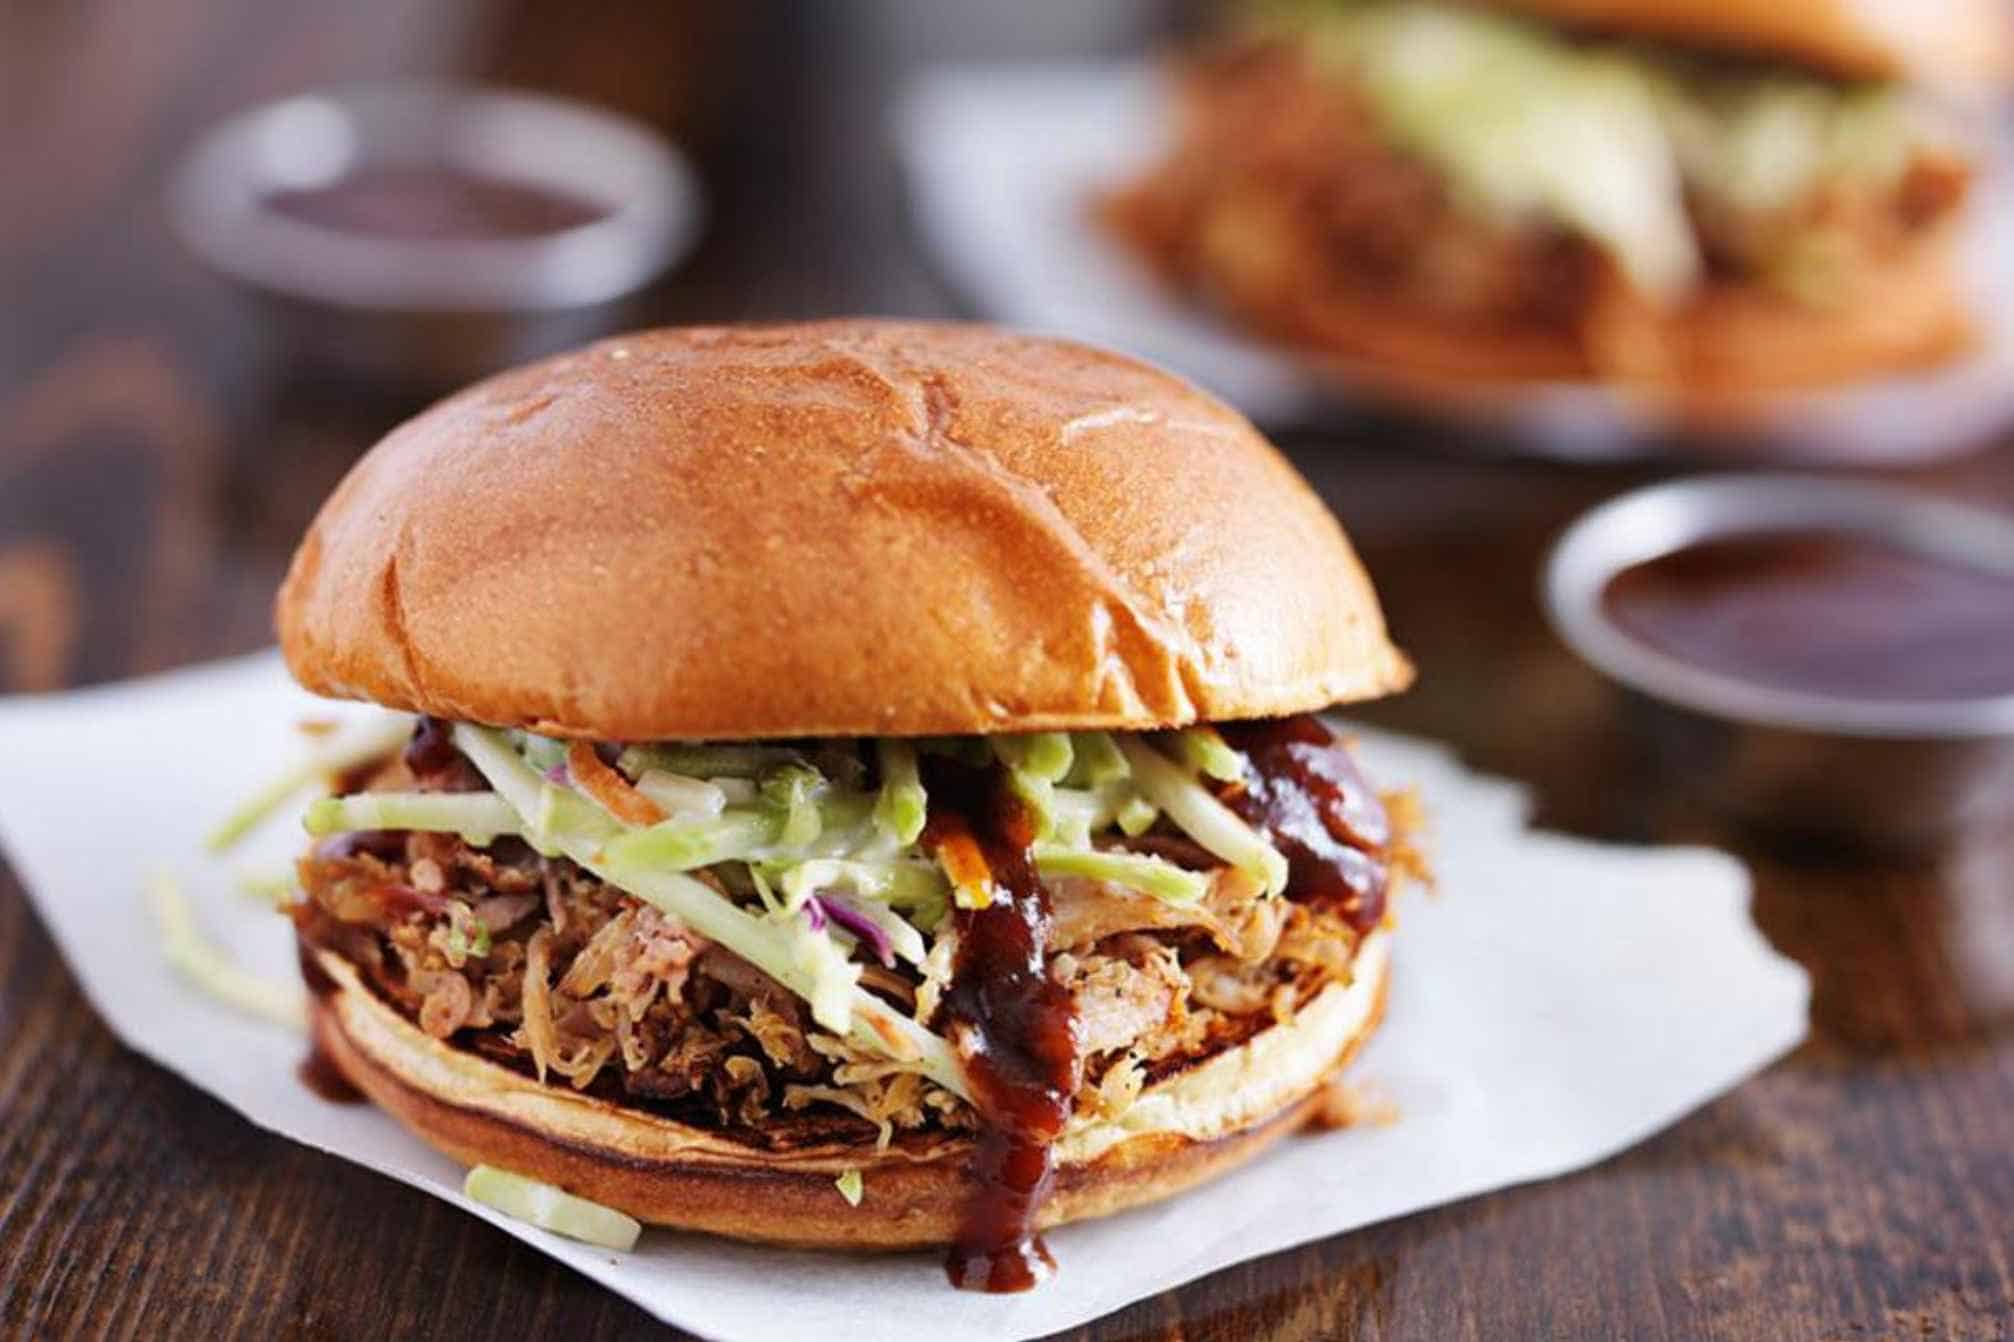 Best Side Dishes For Pulled Pork